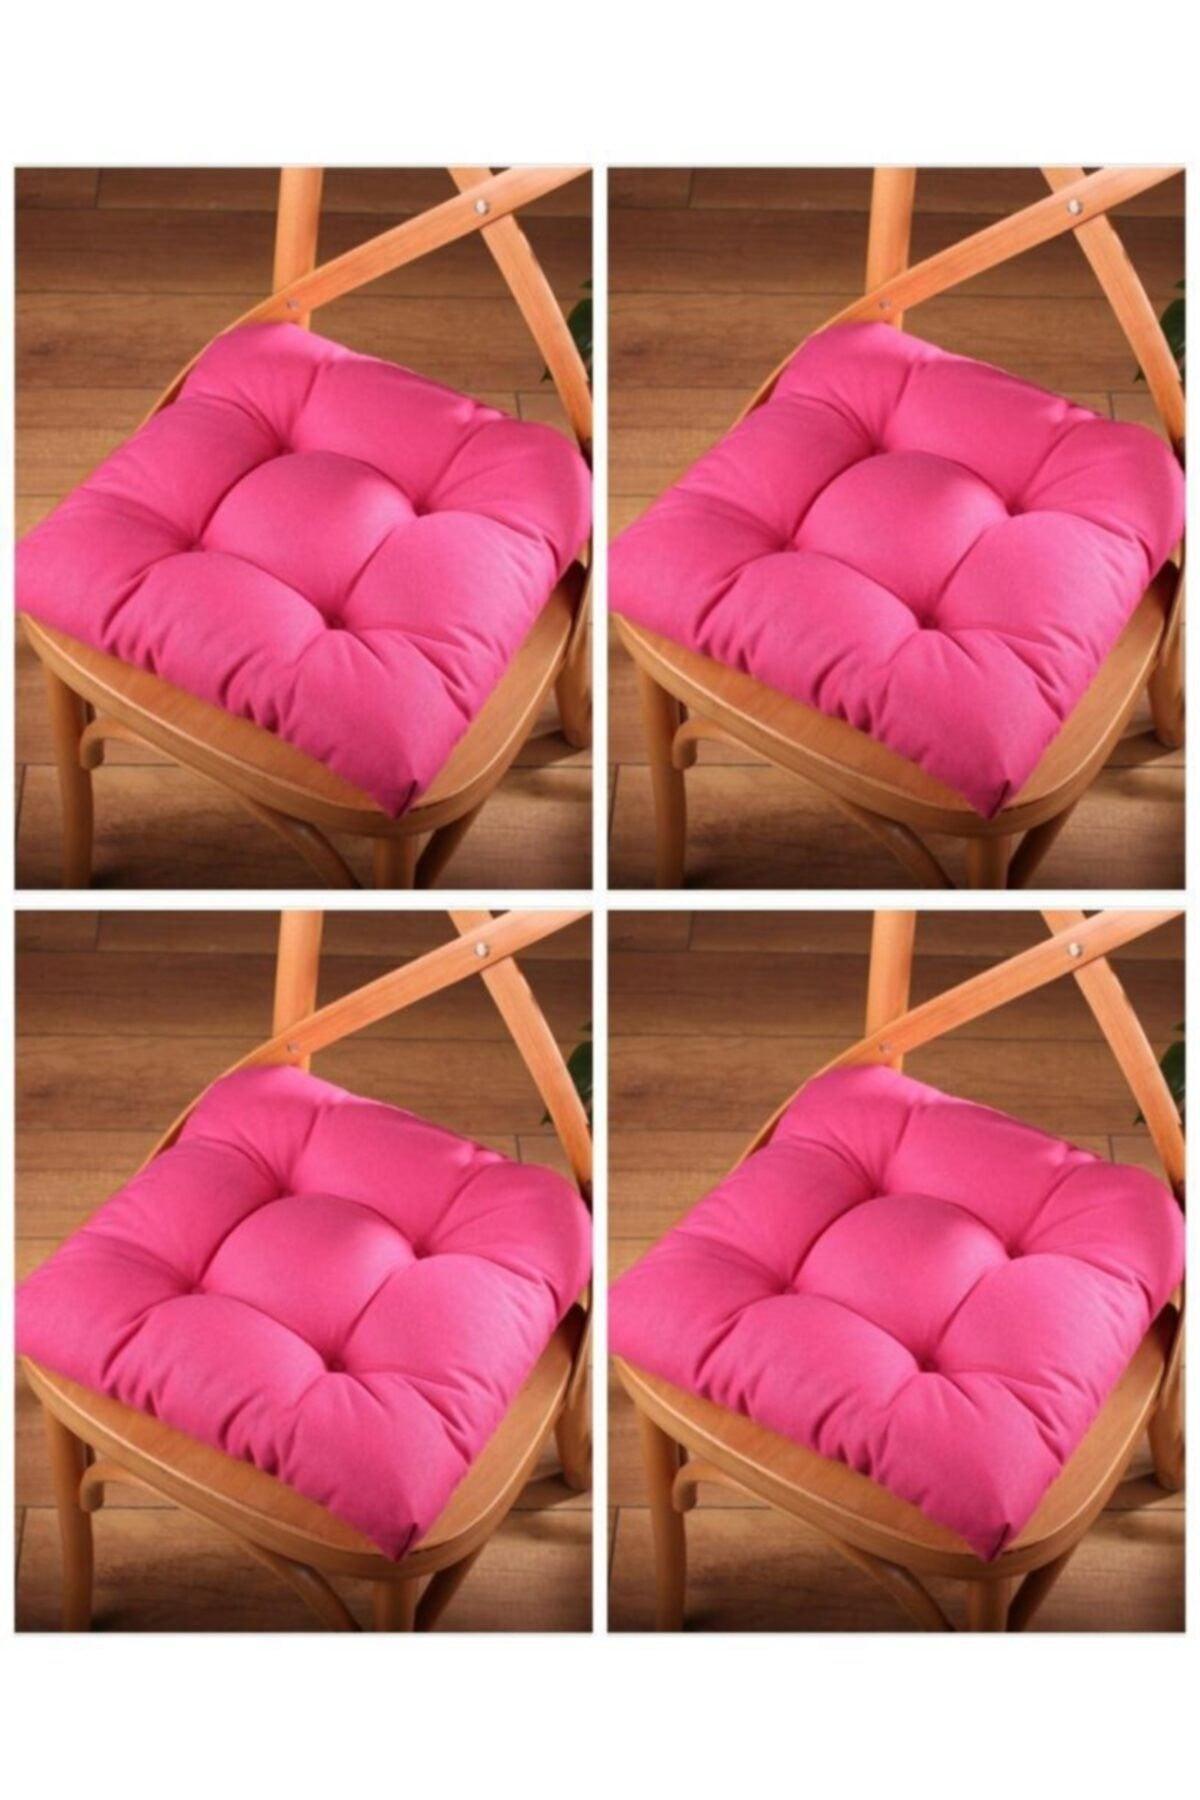 4 Pcs Lux Pofidic Fuchsia Chair Cushion Special Stitched Laced 40x40cm - Swordslife